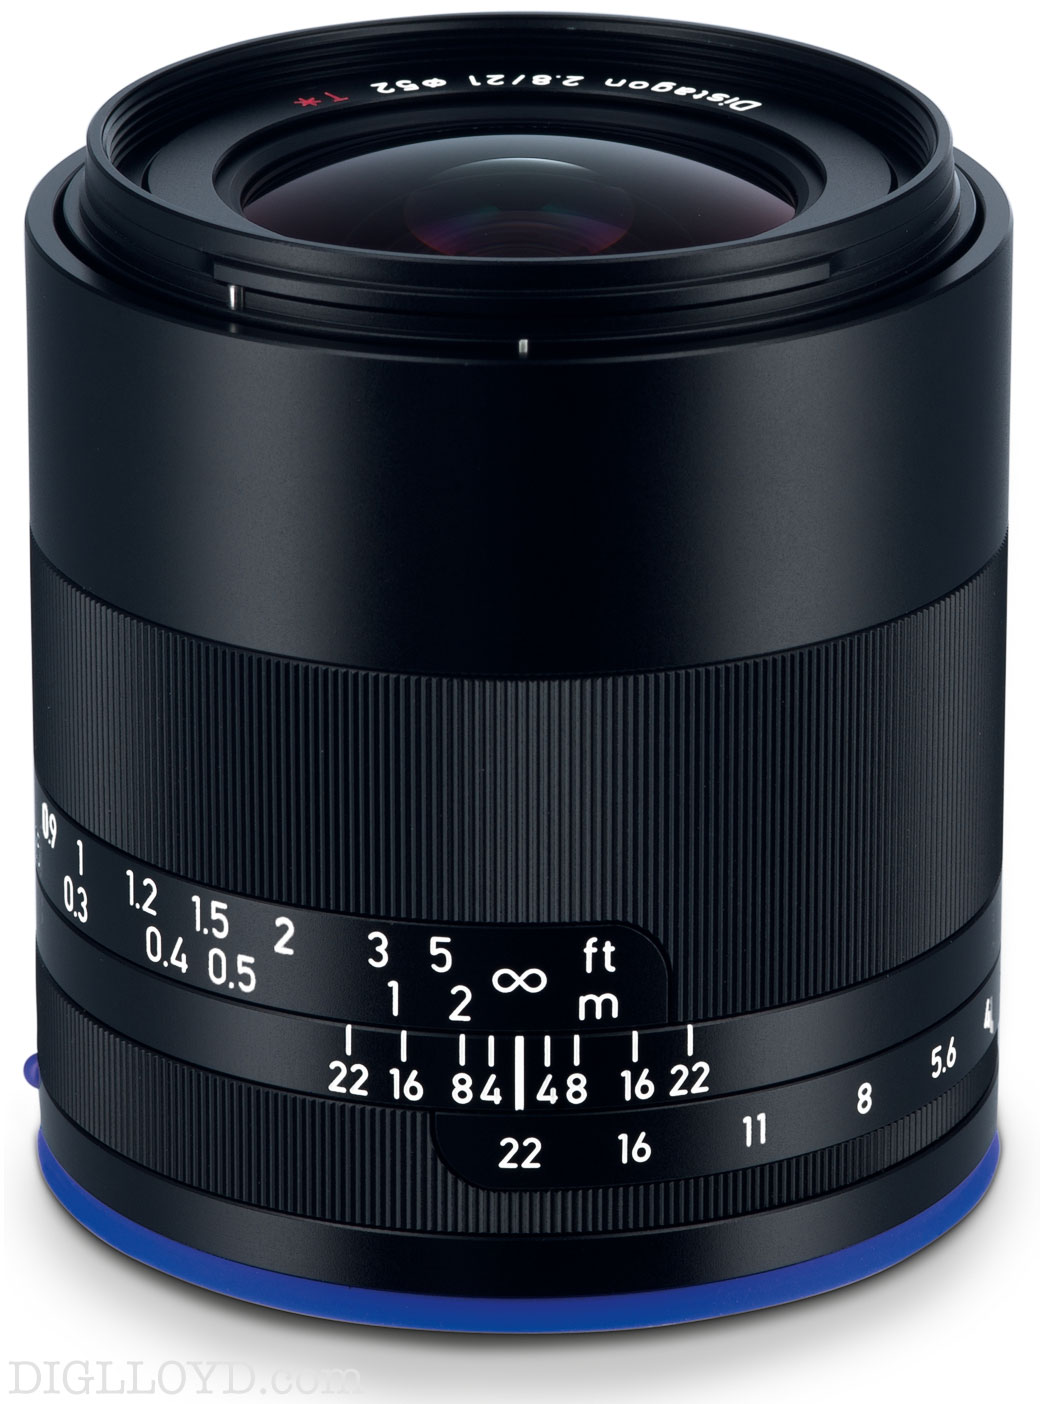 image of Zeiss Loxia 21mm f/2.8 Distagon